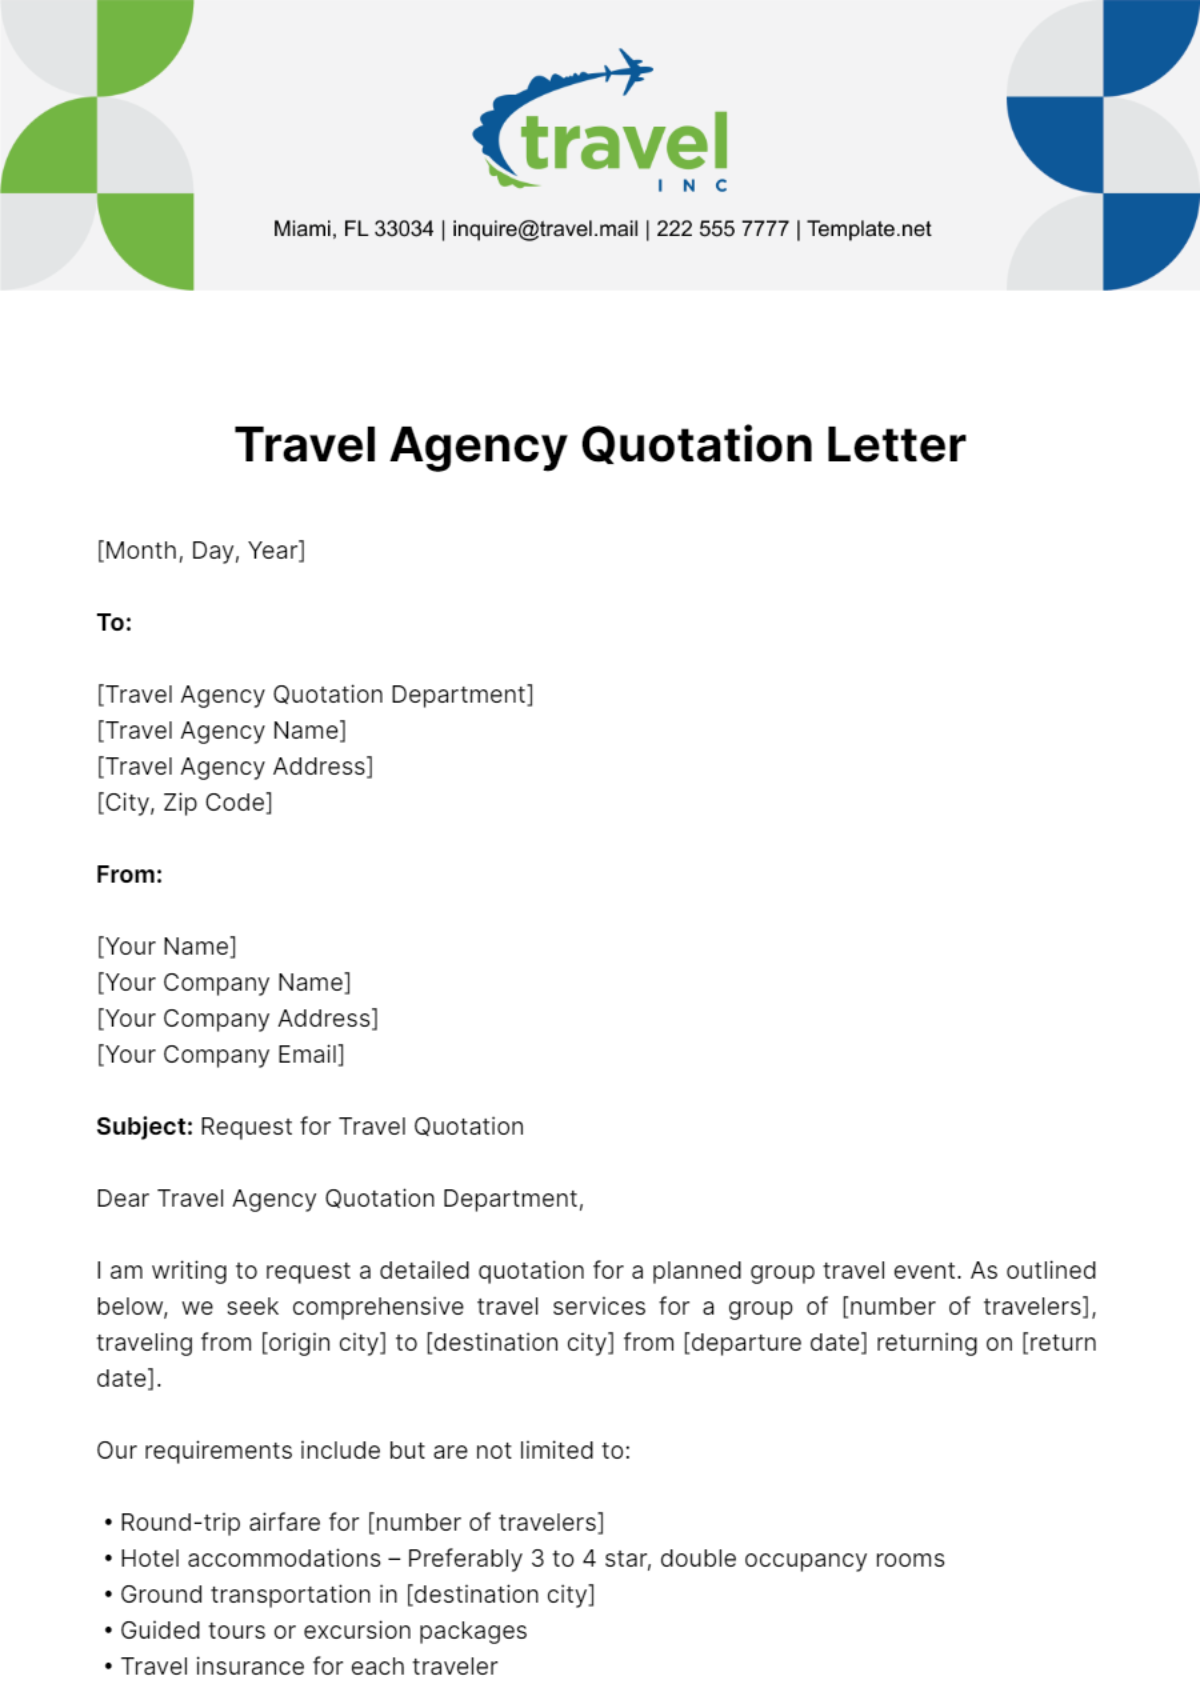 Free Travel Agency Quotation Letter Template